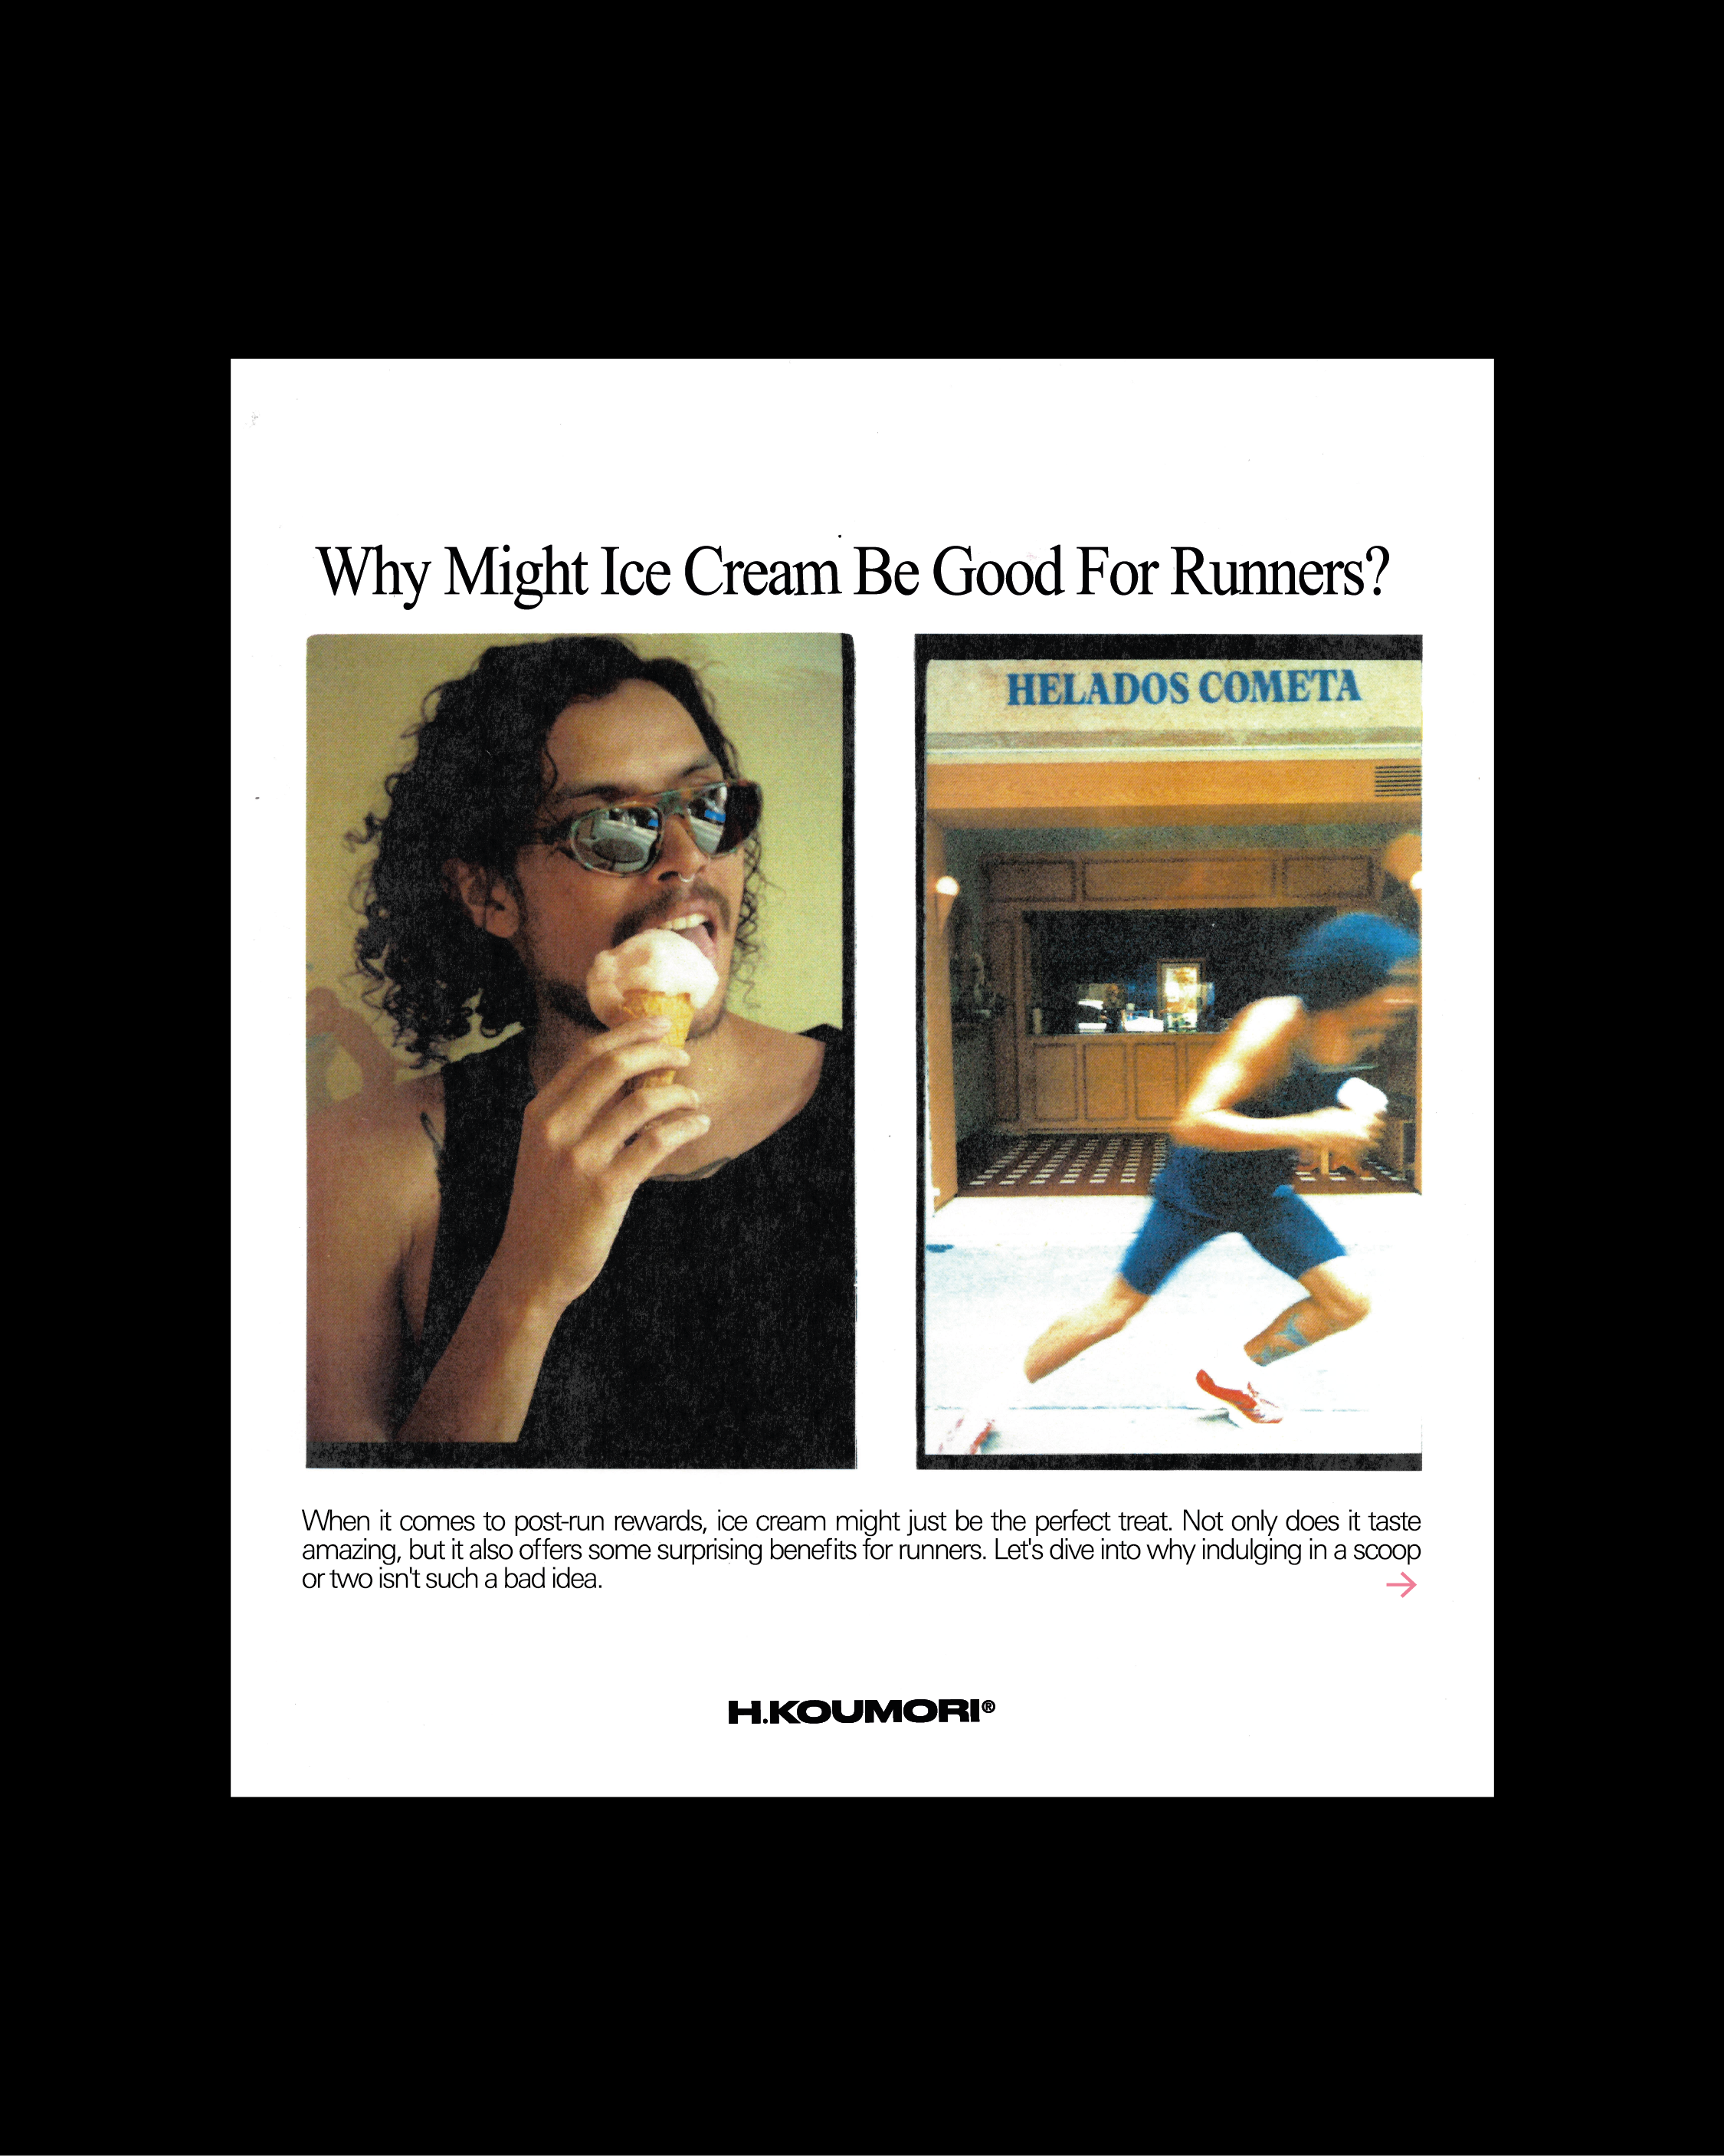 Why might ice cream be good for runners?